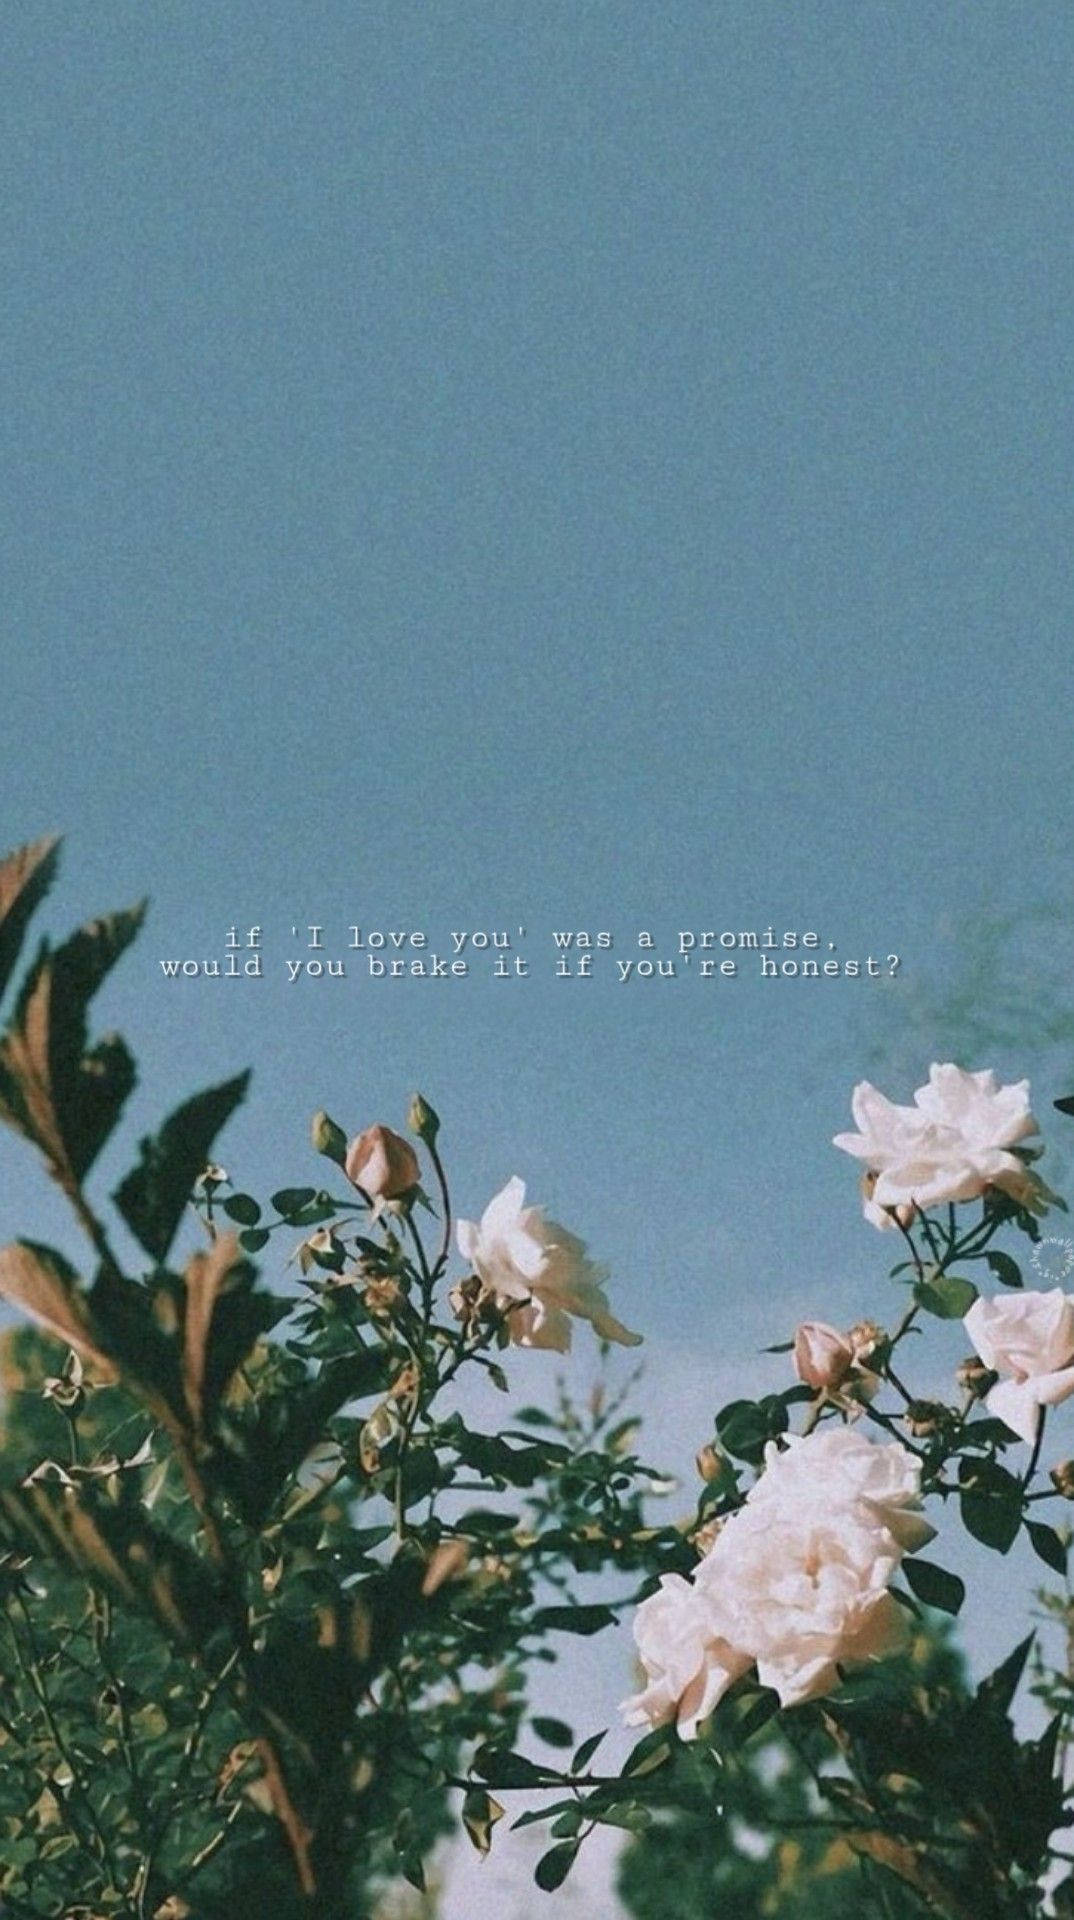 Aesthetic wallpaper for phone with quote 